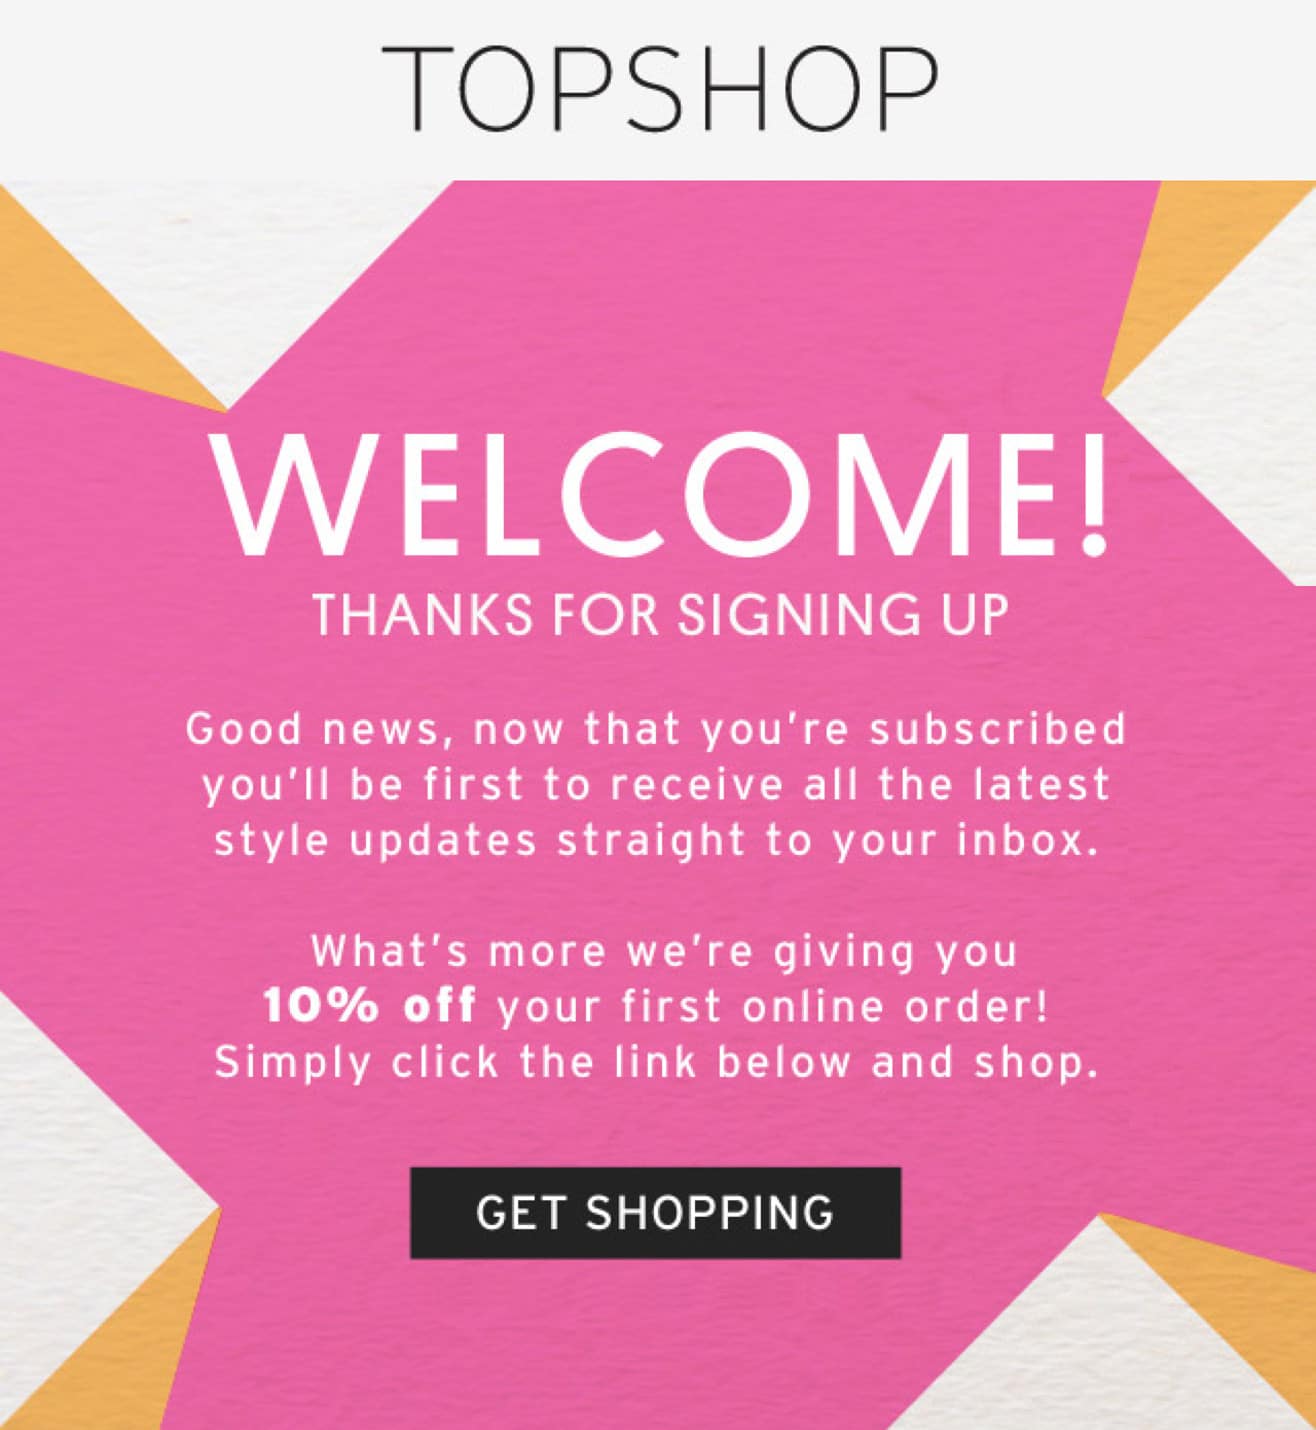 Topshop – Welcome Transactional Email